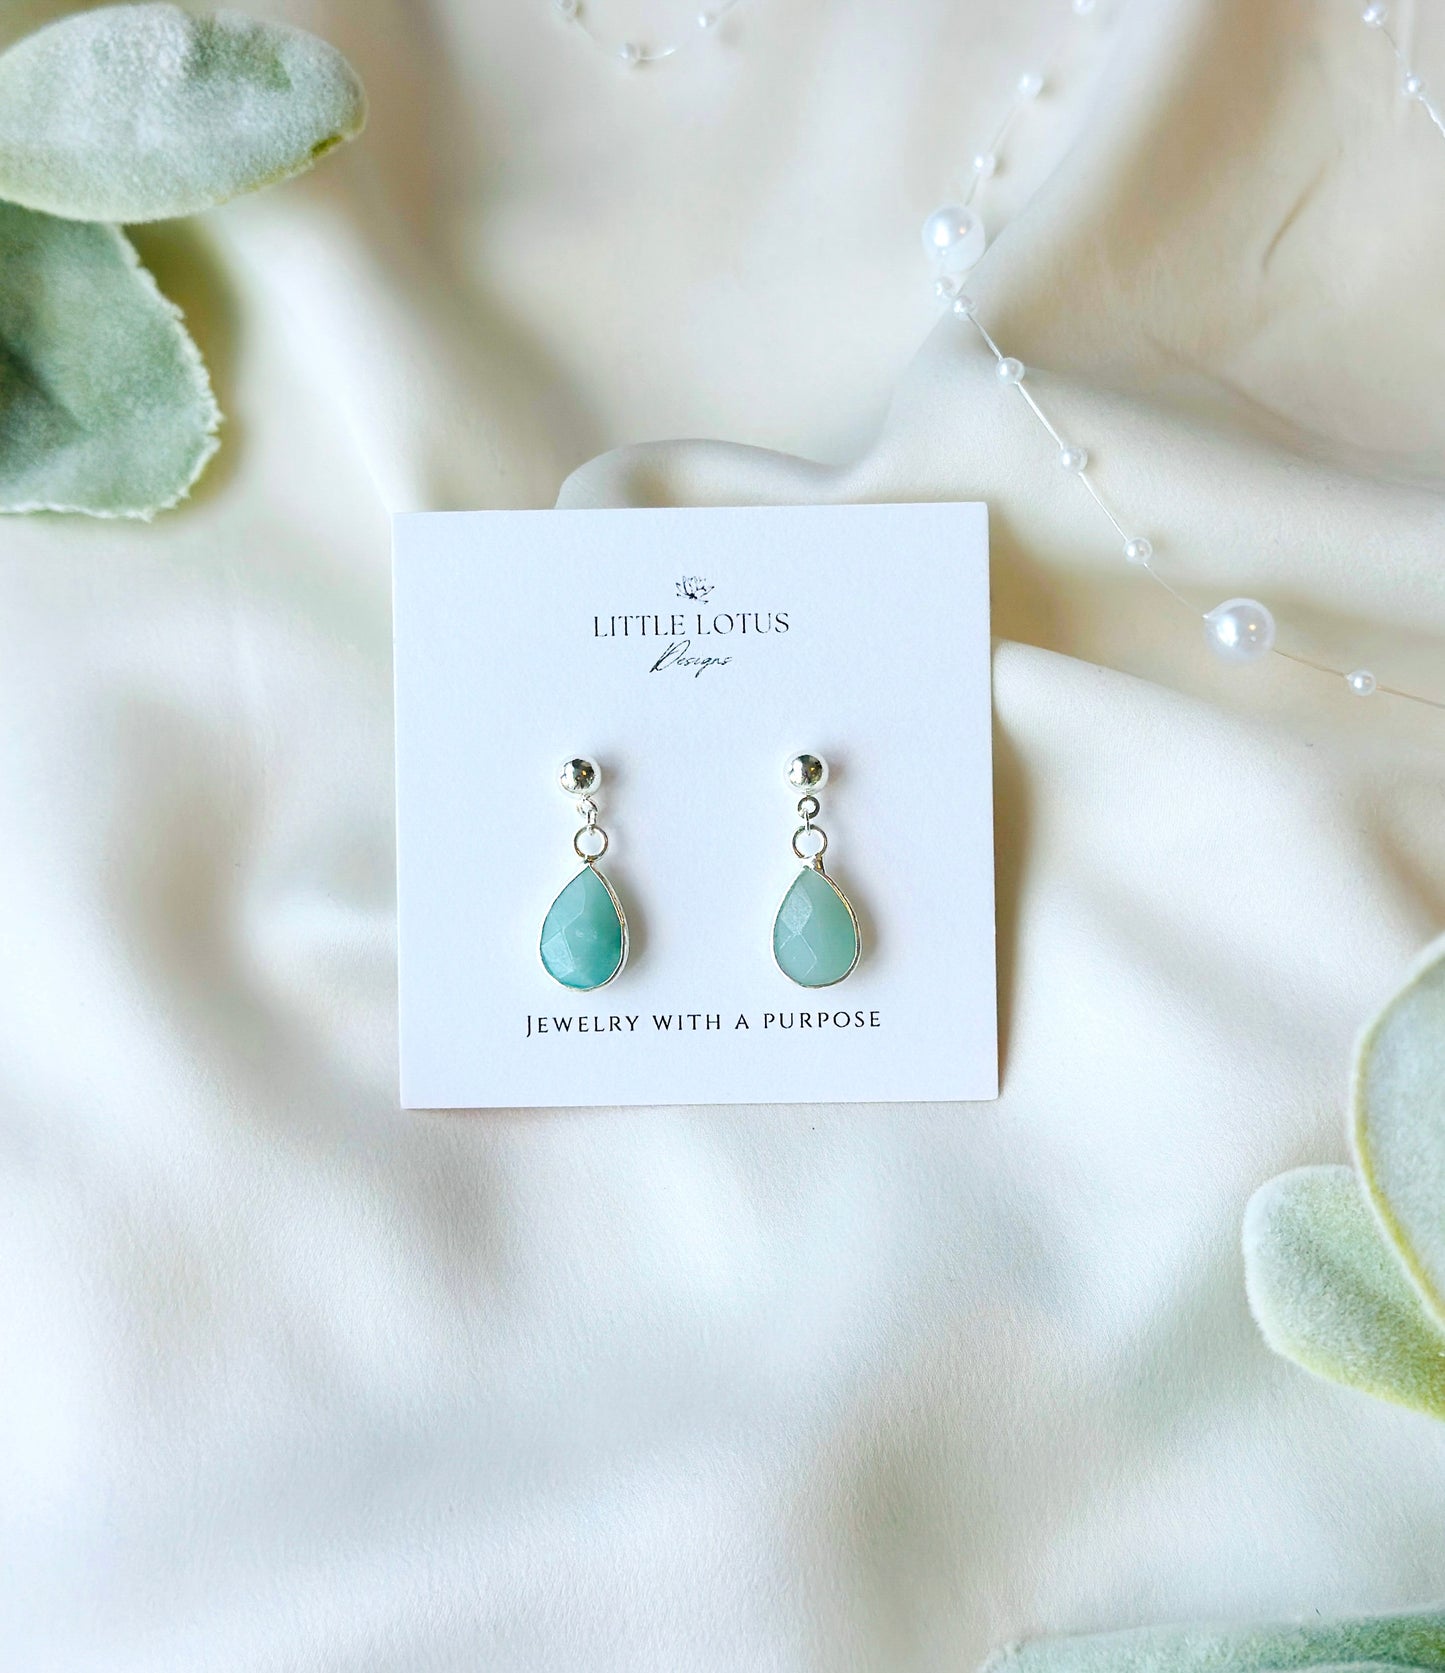 The Baya Earrings, crafted from exquisite sterling silver, showcase the timeless beauty of tear-drop-shaped Aquamarine gemstones. Aquamarine, with its serene blue hues reminiscent of the ocean, is used&nbsp;to inspire calmness and clarity.